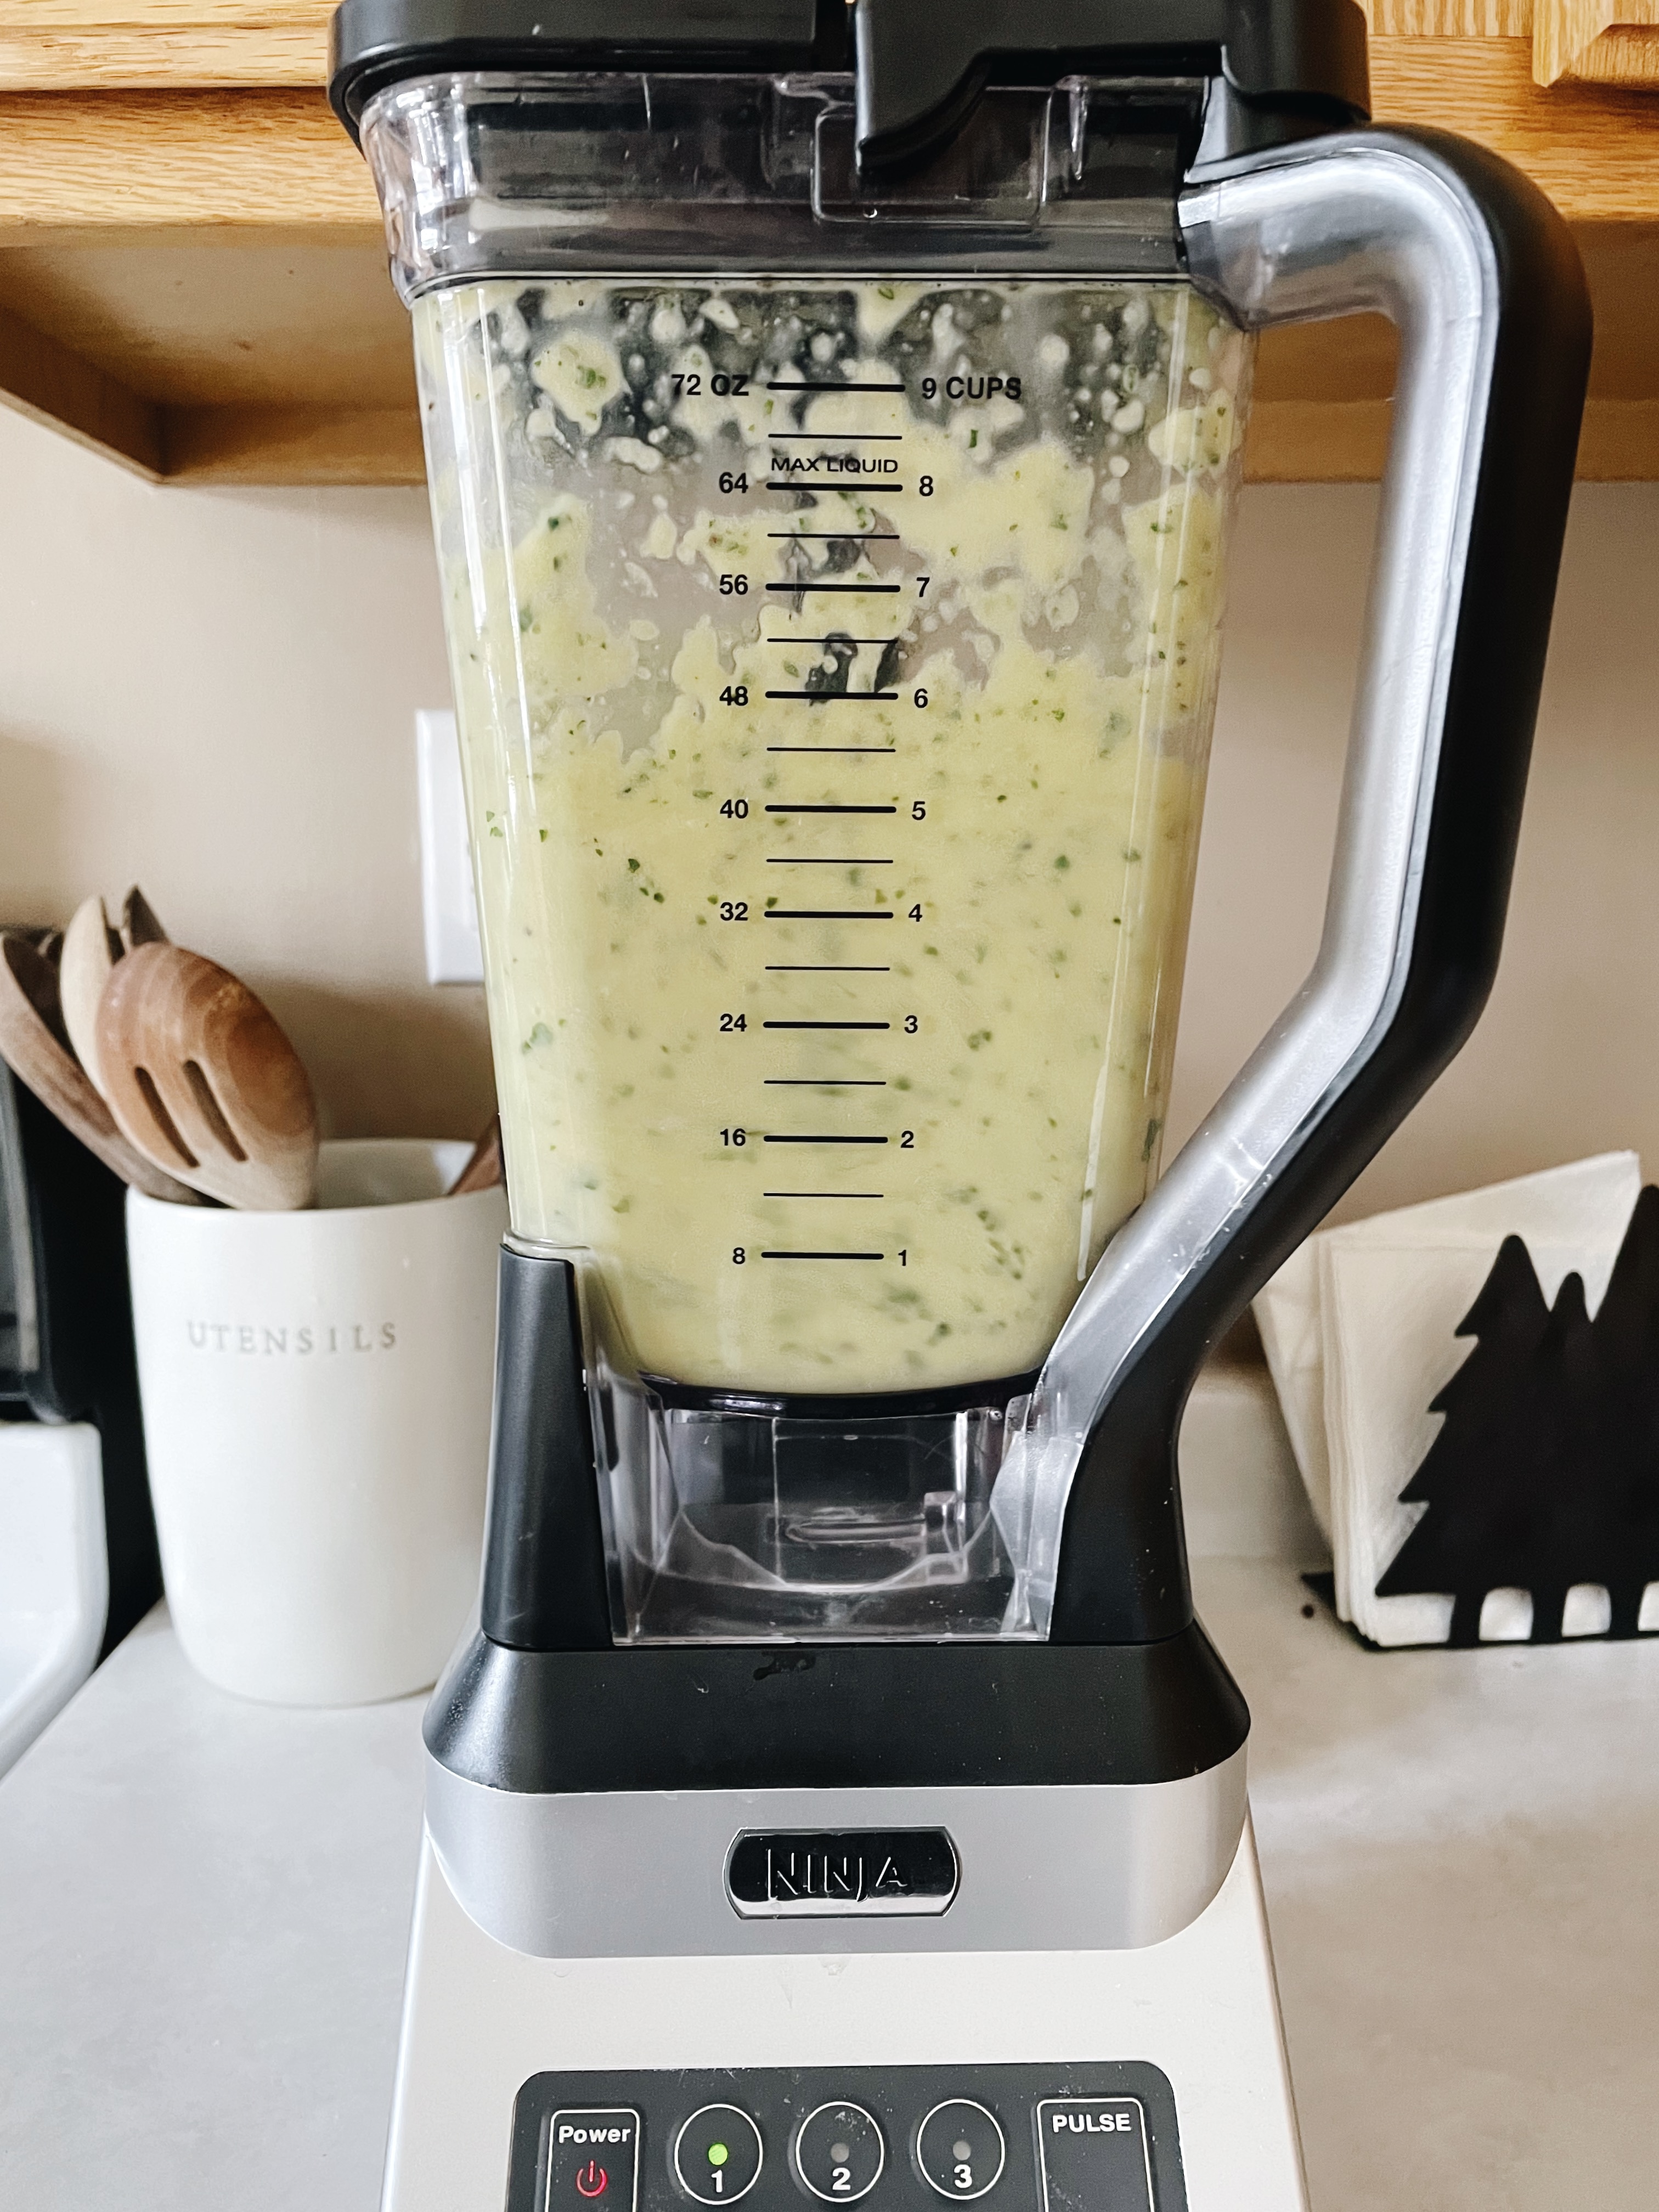 Ninja Blender to blend up an easy everyday green smoothie